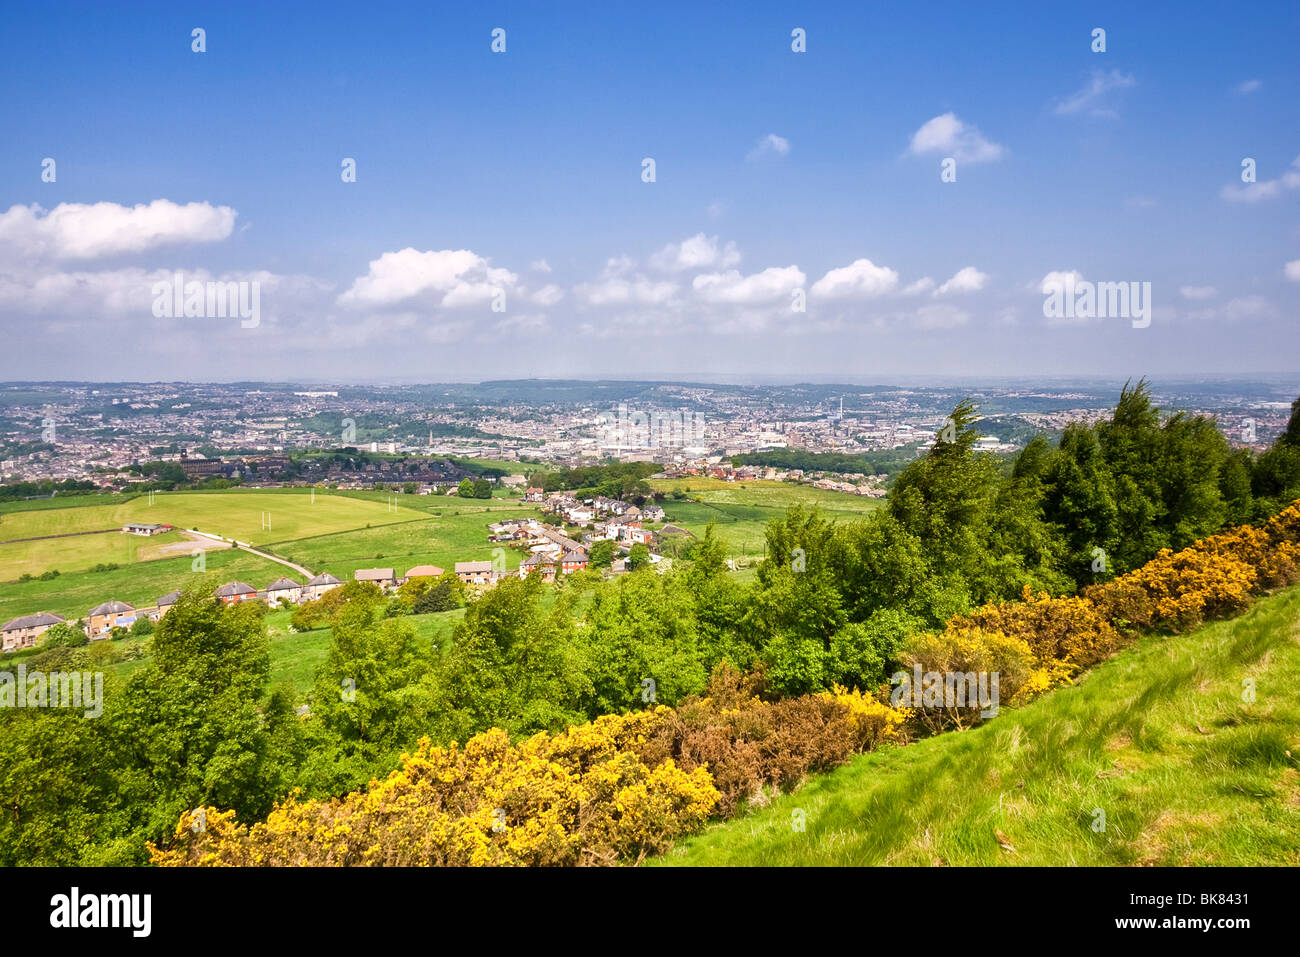 View of the town of Huddersfield from Castle Hill, Huddersfield, West Yorkshire, UK Stock Photo